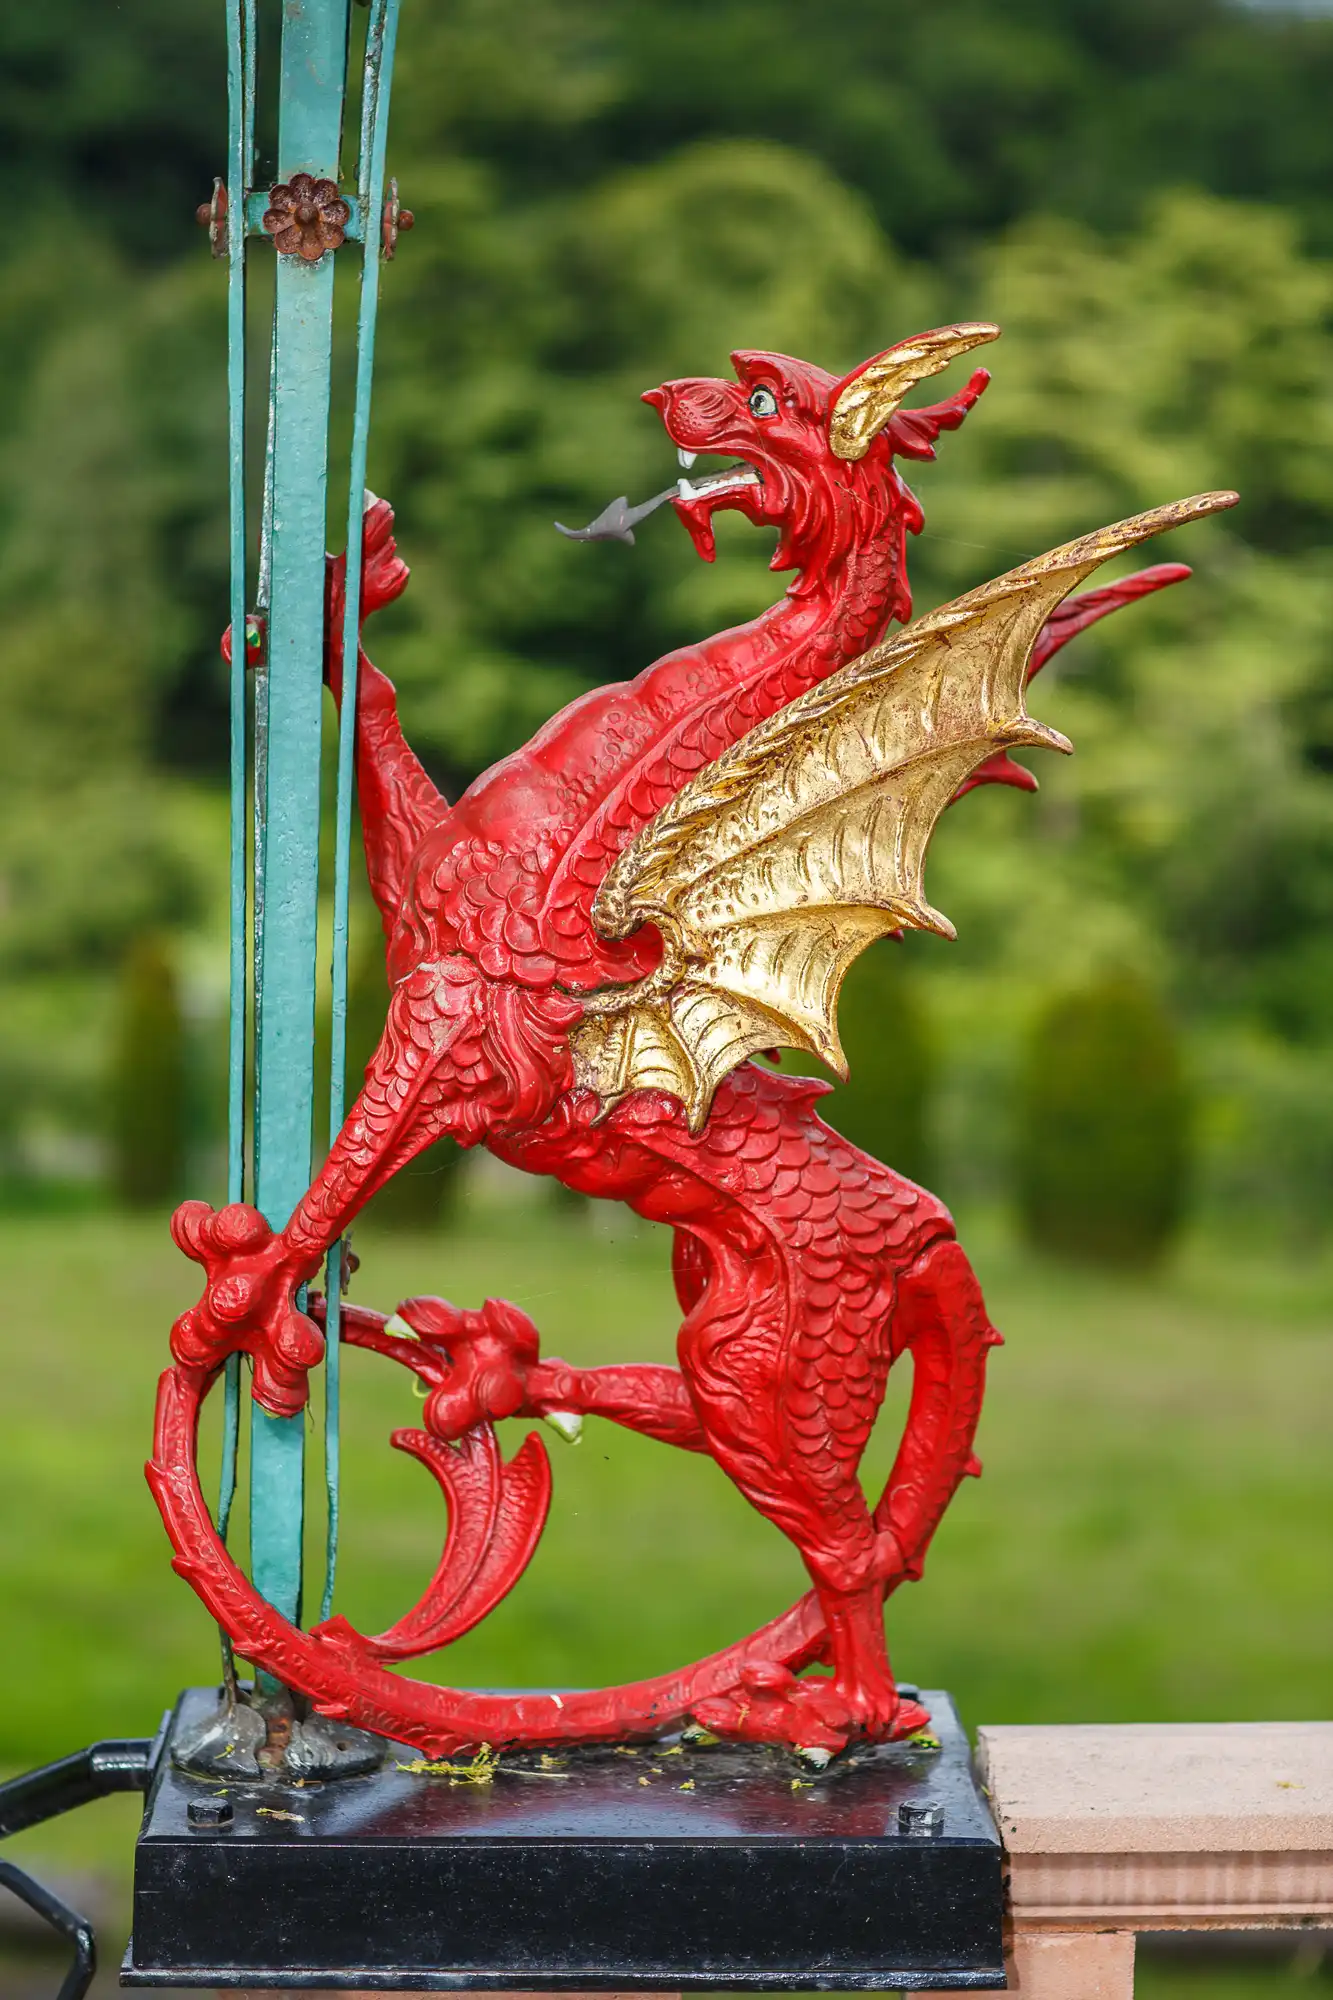 A vibrant red and gold dragon statue with wings spread and mouth open, mounted on a fence against a blurred green background.